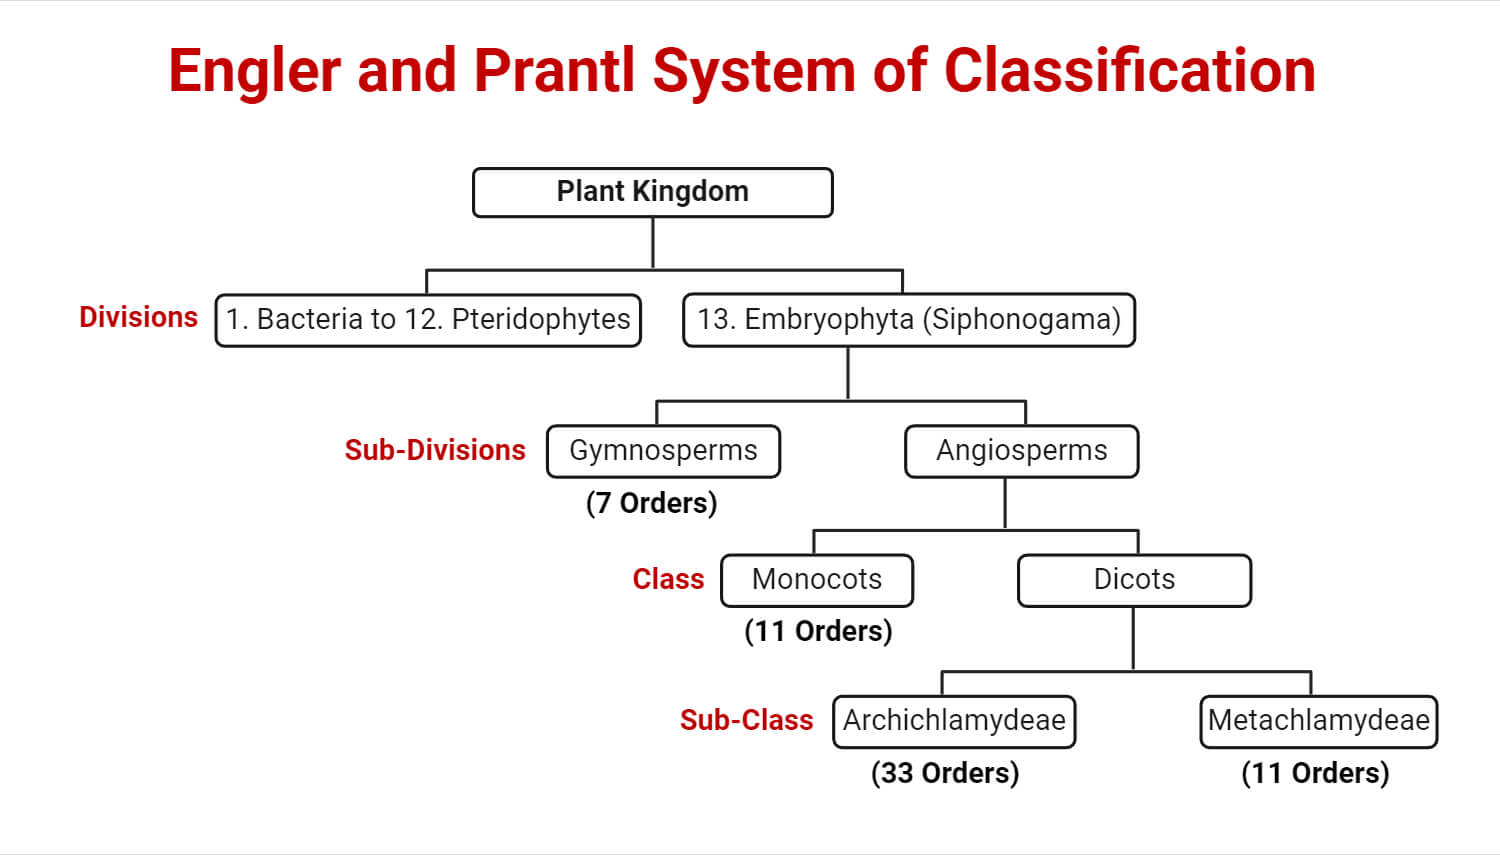 Engler and Prantl System of Classification